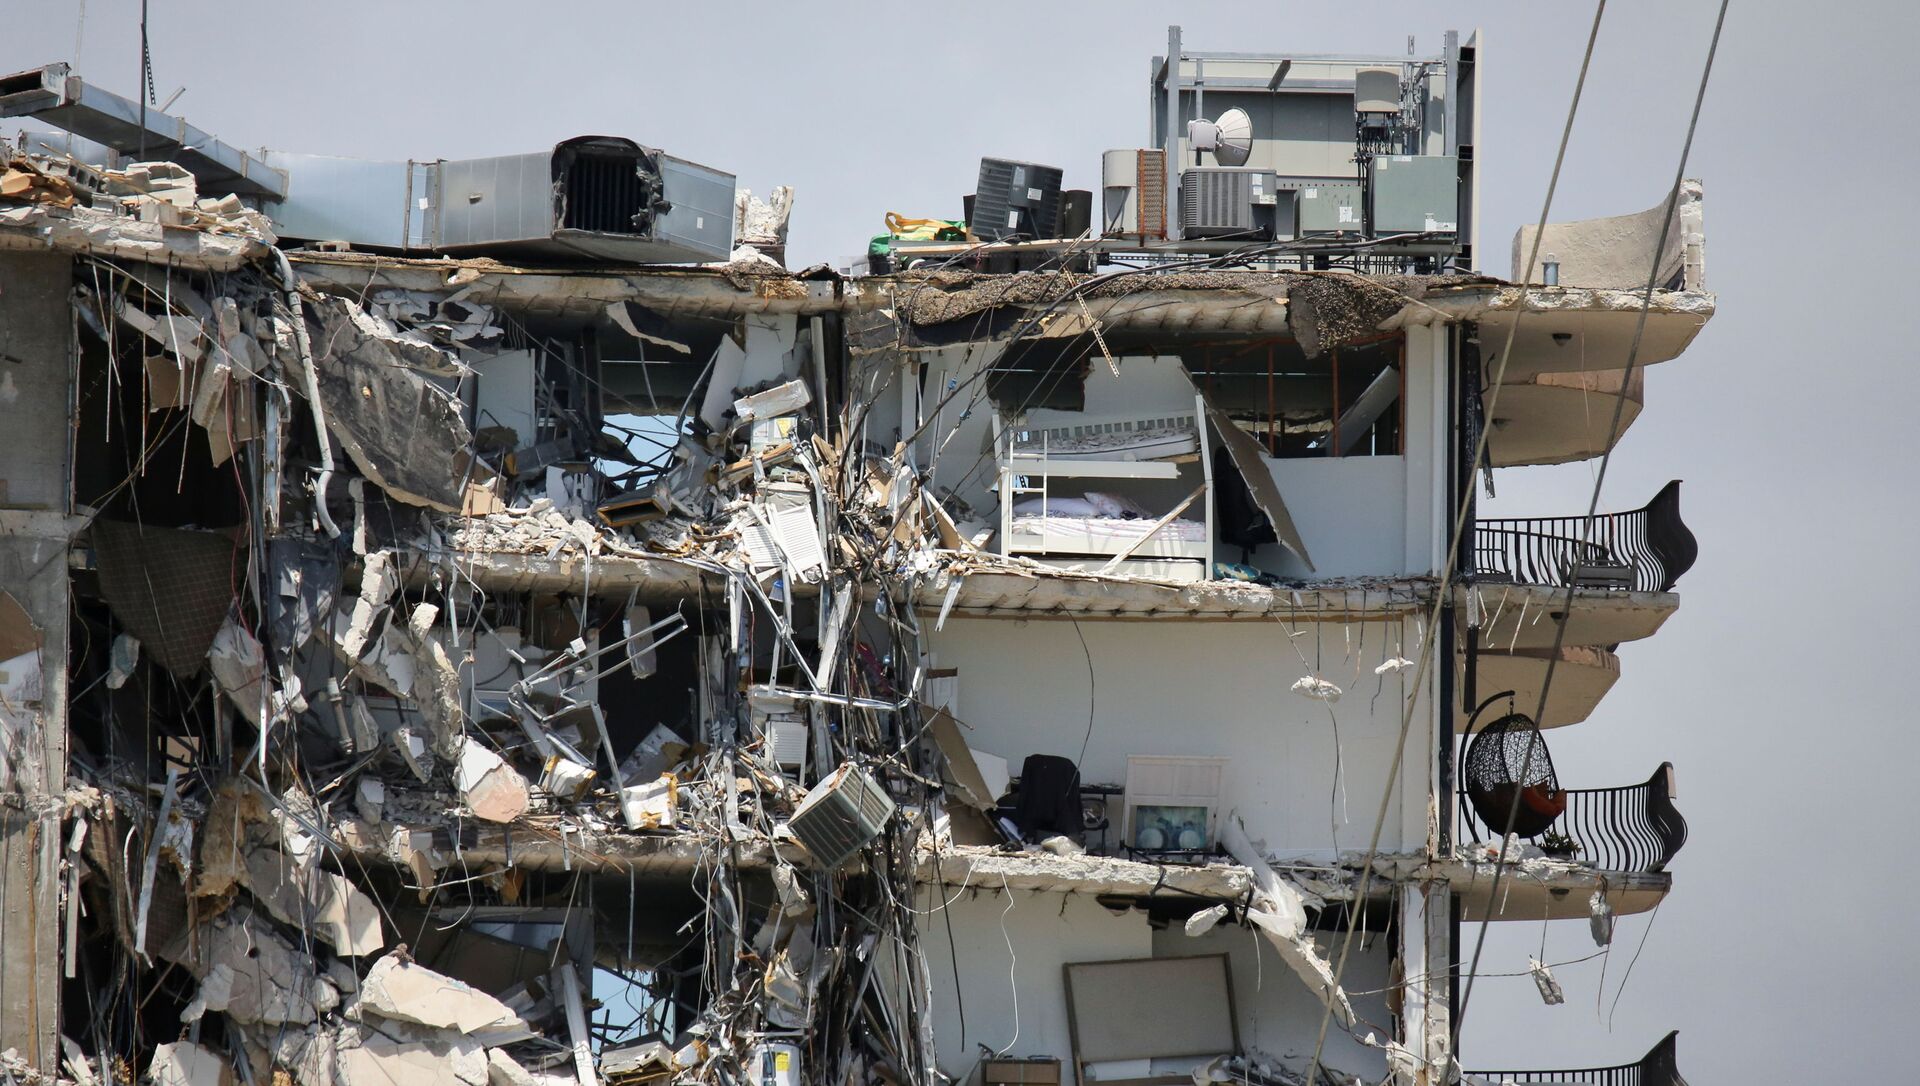 A view of a partially collapsed residential building as the emergency crews continue search and rescue operations for survivors, in Surfside, near Miami Beach, Florida, U.S. June 27, 2021 - Sputnik International, 1920, 02.07.2021